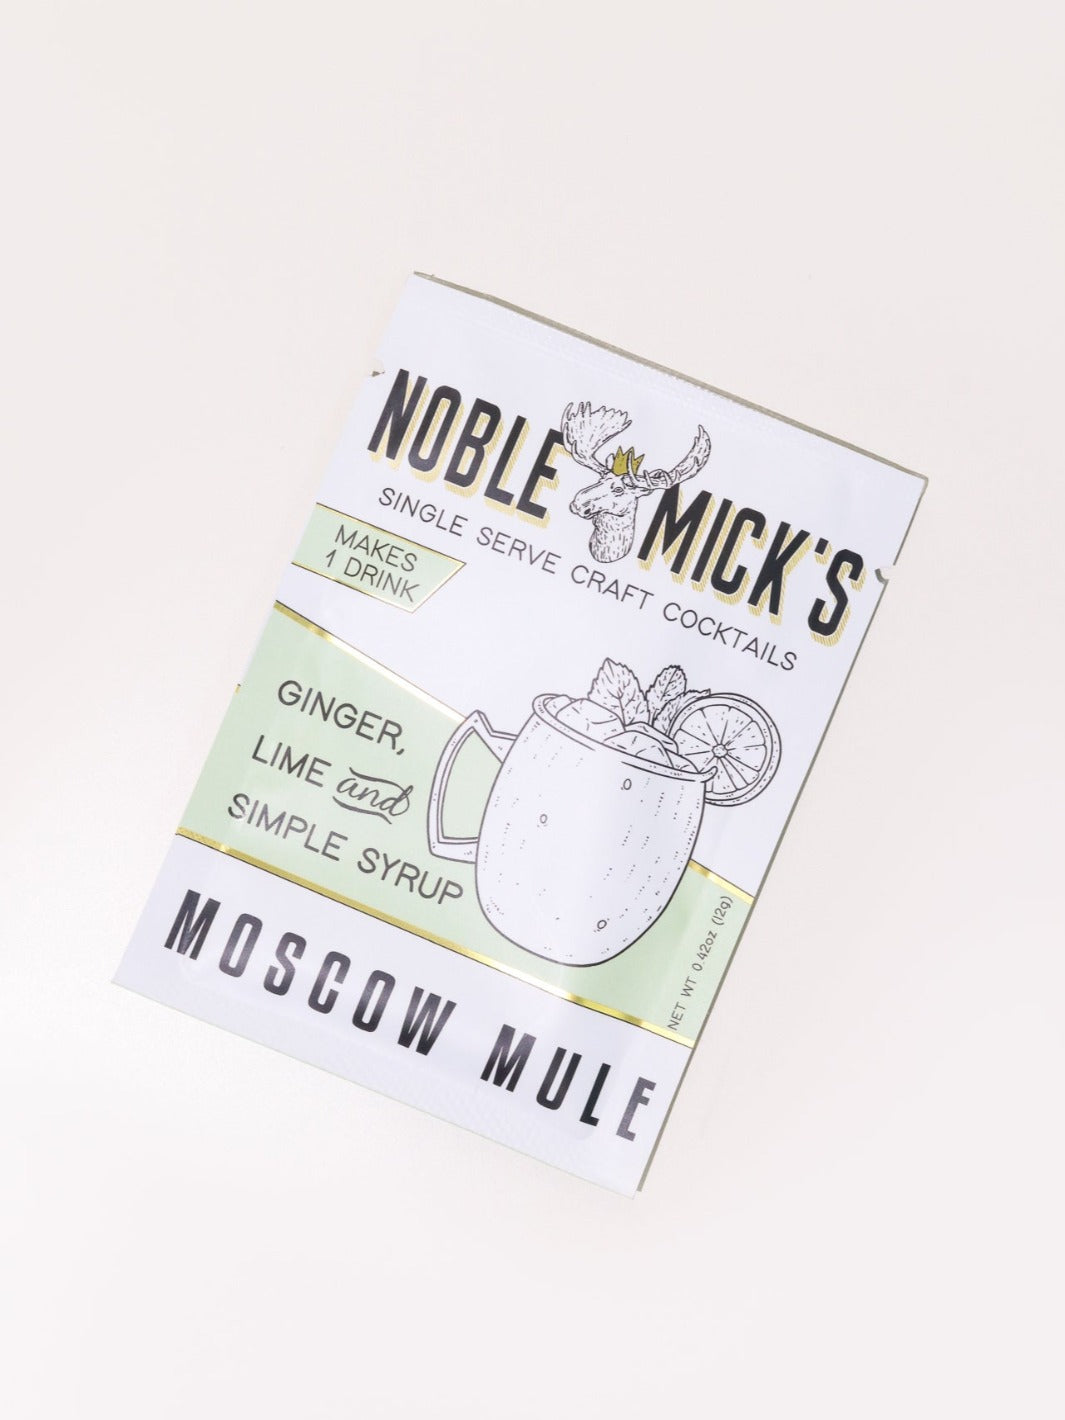 Moscow Mule Cocktail Mixer